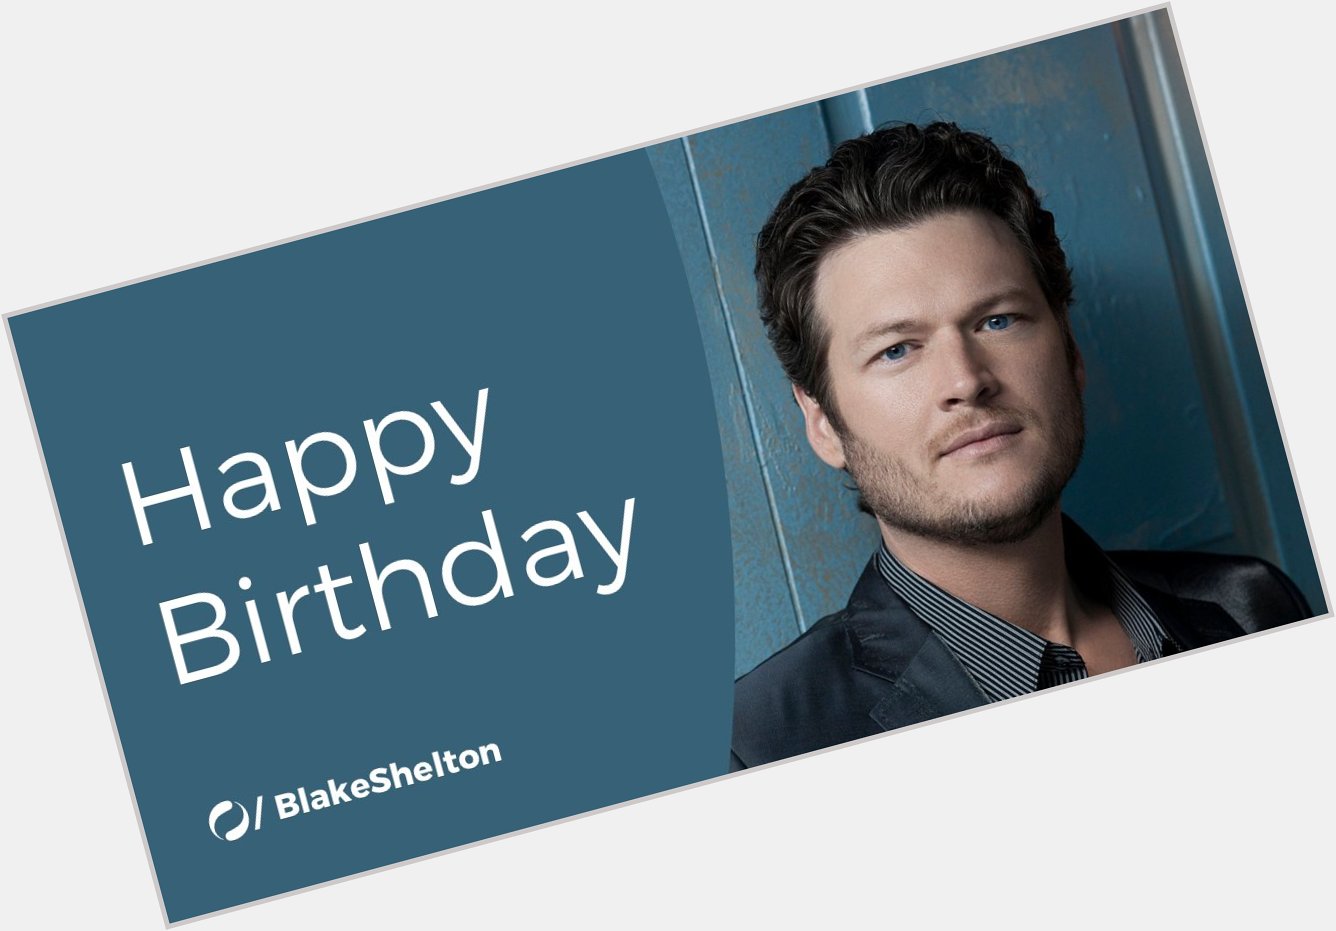 Happy Birthday Blake Shelton, we hope you have an awesome day!  